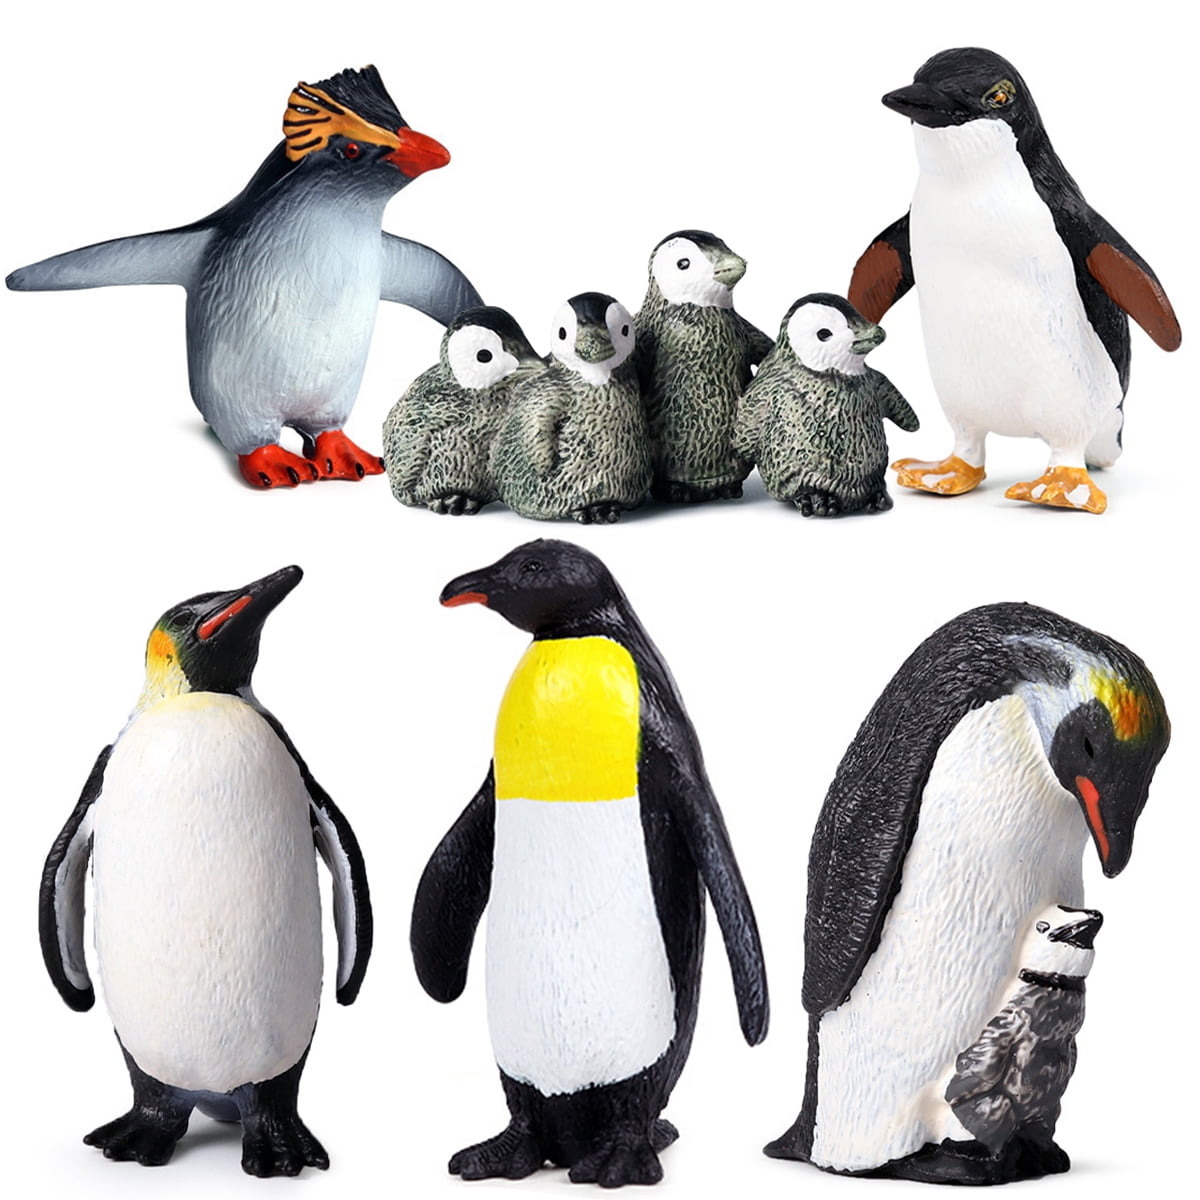 Lot 4 Plush Animals Babies PENGUIN Snowman 6" COLLECT Play Gift Miniature NEW 